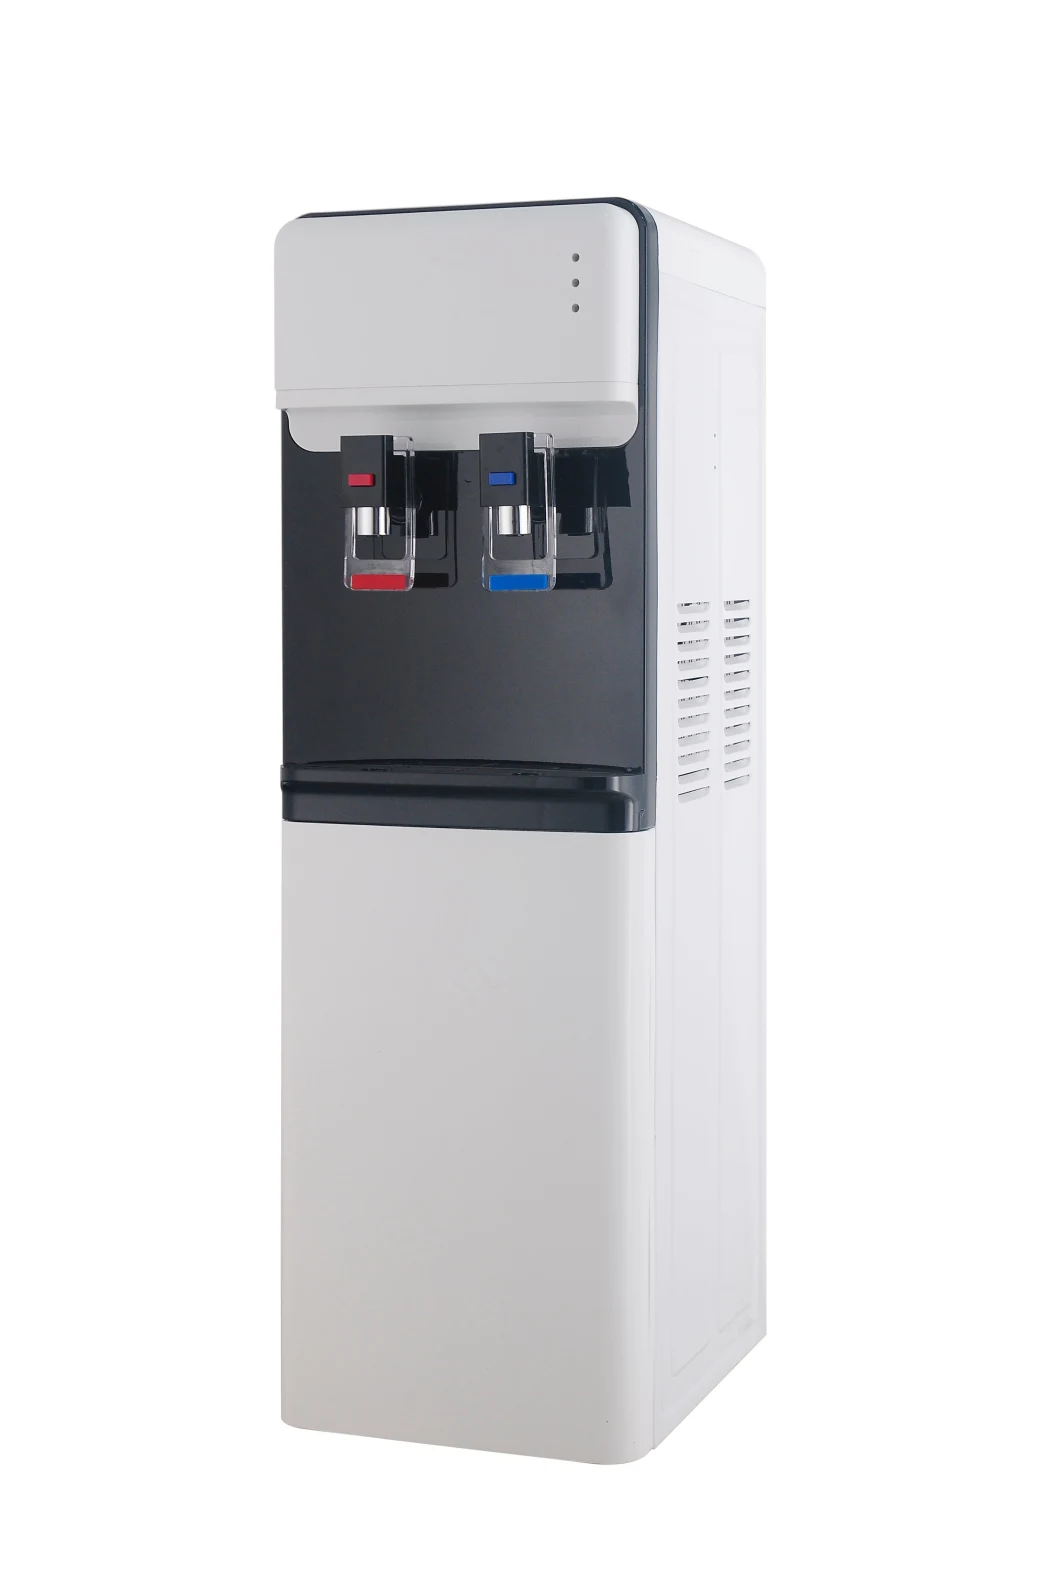 Middle Sized Standing Water Dispenser Hot and Cold Water (YLRS-D)